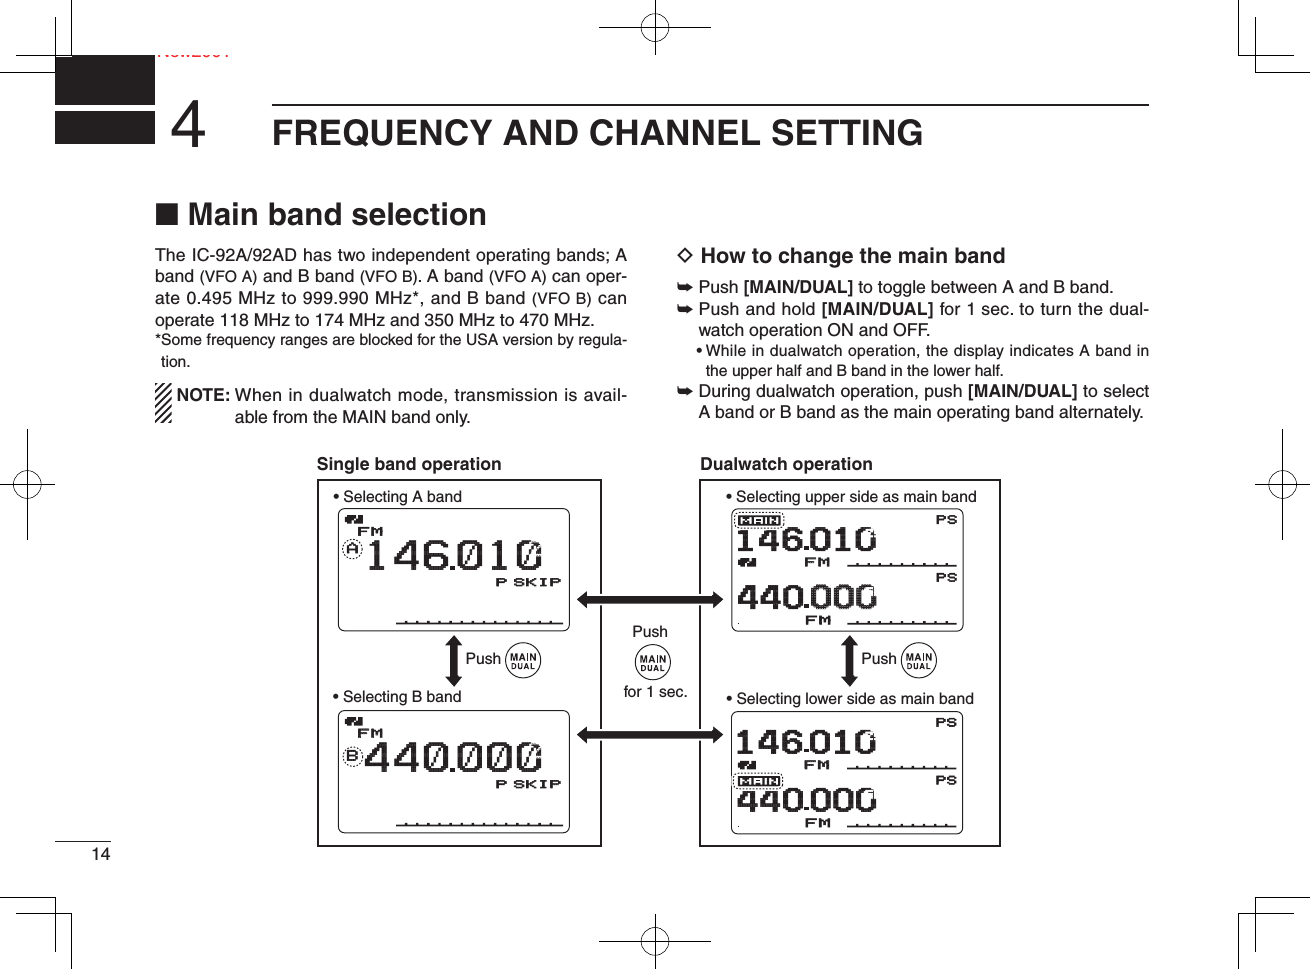 14NeNew2001FREQUENCY AND CHANNEL SETTING4■ Main band selectionThe IC-92A/92AD has two independent operating bands; A band (VFO A) and B band (VFO B). A band (VFO A) can oper-ate 0.495 MHz to 999.990 MHz*, and B band (VFO B) can operate 118 MHz to 174 MHz and 350 MHz to 470 MHz. * Some frequency ranges are blocked for the USA version by regula-tion. NOTE:  When in dualwatch mode, transmission is avail-able from the MAIN band only.D How to change the main band➥  Push [MAIN/DUAL] to toggle between A and B band.➥  Push and hold [MAIN/DUAL] for 1 sec. to turn the dual-watch operation ON and OFF. •  While in dualwatch operation, the display indicates A band in the upper half and B band in the lower half.➥  During dualwatch operation, push [MAIN/DUAL] to select A band or B band as the main operating band alternately.DTCSDTCSWPSEMEMWPSFMFMPRIOPRIOPRIOPRIO+DUP+DUP+DUP+DUPFM1460104400000002550μ000000μ000000DTCSDTCSWPSEMEMWPSFMFMPRIOPRIOPRIOPRIO+DUP+DUP+DUP+DUPFM1460104400002550μ000000μ000000AMemoNameMemoNameμPRIO WX EMRDTCSFMLOWATT146010PSKIPSKIP+DUP2525000000MemoNameμPRIOPRIO WXWX EMREMRDTCSDTCSFMFMBLOWATT440000PSKIPSKIP+DUP+DUP2525000Push Push• Selecting A band • Selecting upper side as main band• Selecting lower side as main band• Selecting B bandPushDTCSDTCSWPSEMWPSFMPRIOPRIO+DUP+DUPFM146 010440 0002550μ000μ000DTCSDTCSWPSEMWPSFMPRIOPRIO+DUP+DUPFM146 010440 0002550μ000μ000AMemoNameμPRIO WX EMRDTCSFMLOWATT146010P SKIP+DUP25000MemoNameμPRIO WX EMRDTCSFMBLOWATT440000P SKIP+DUP25000Single band operation Dualwatch operationfor 1 sec.